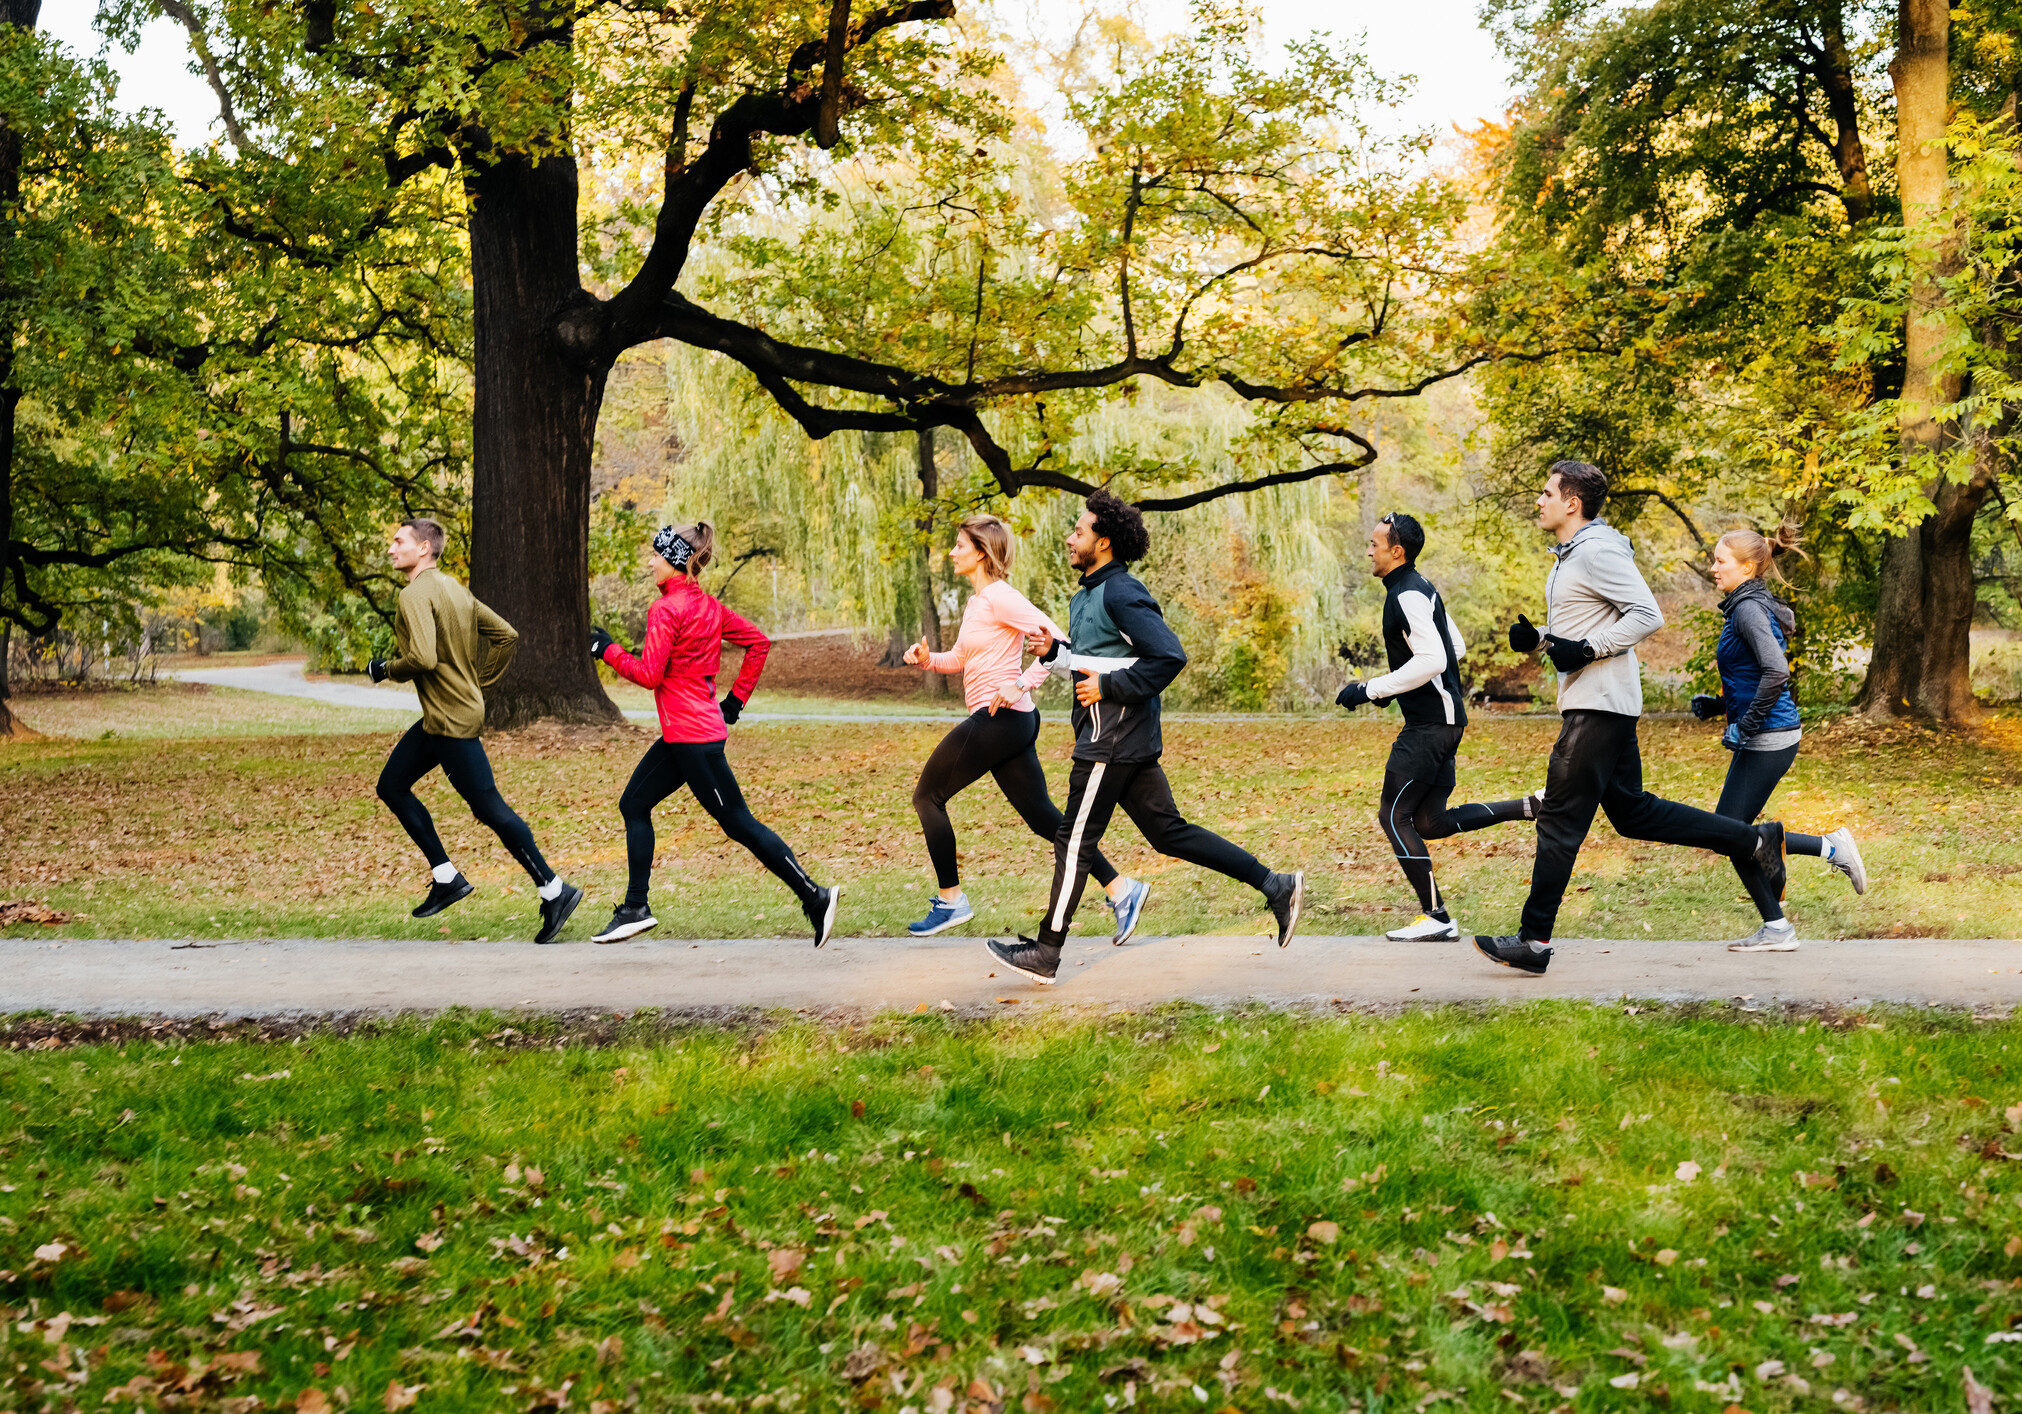 A group of joggers racing against each other on pedestrian walk way at the park.